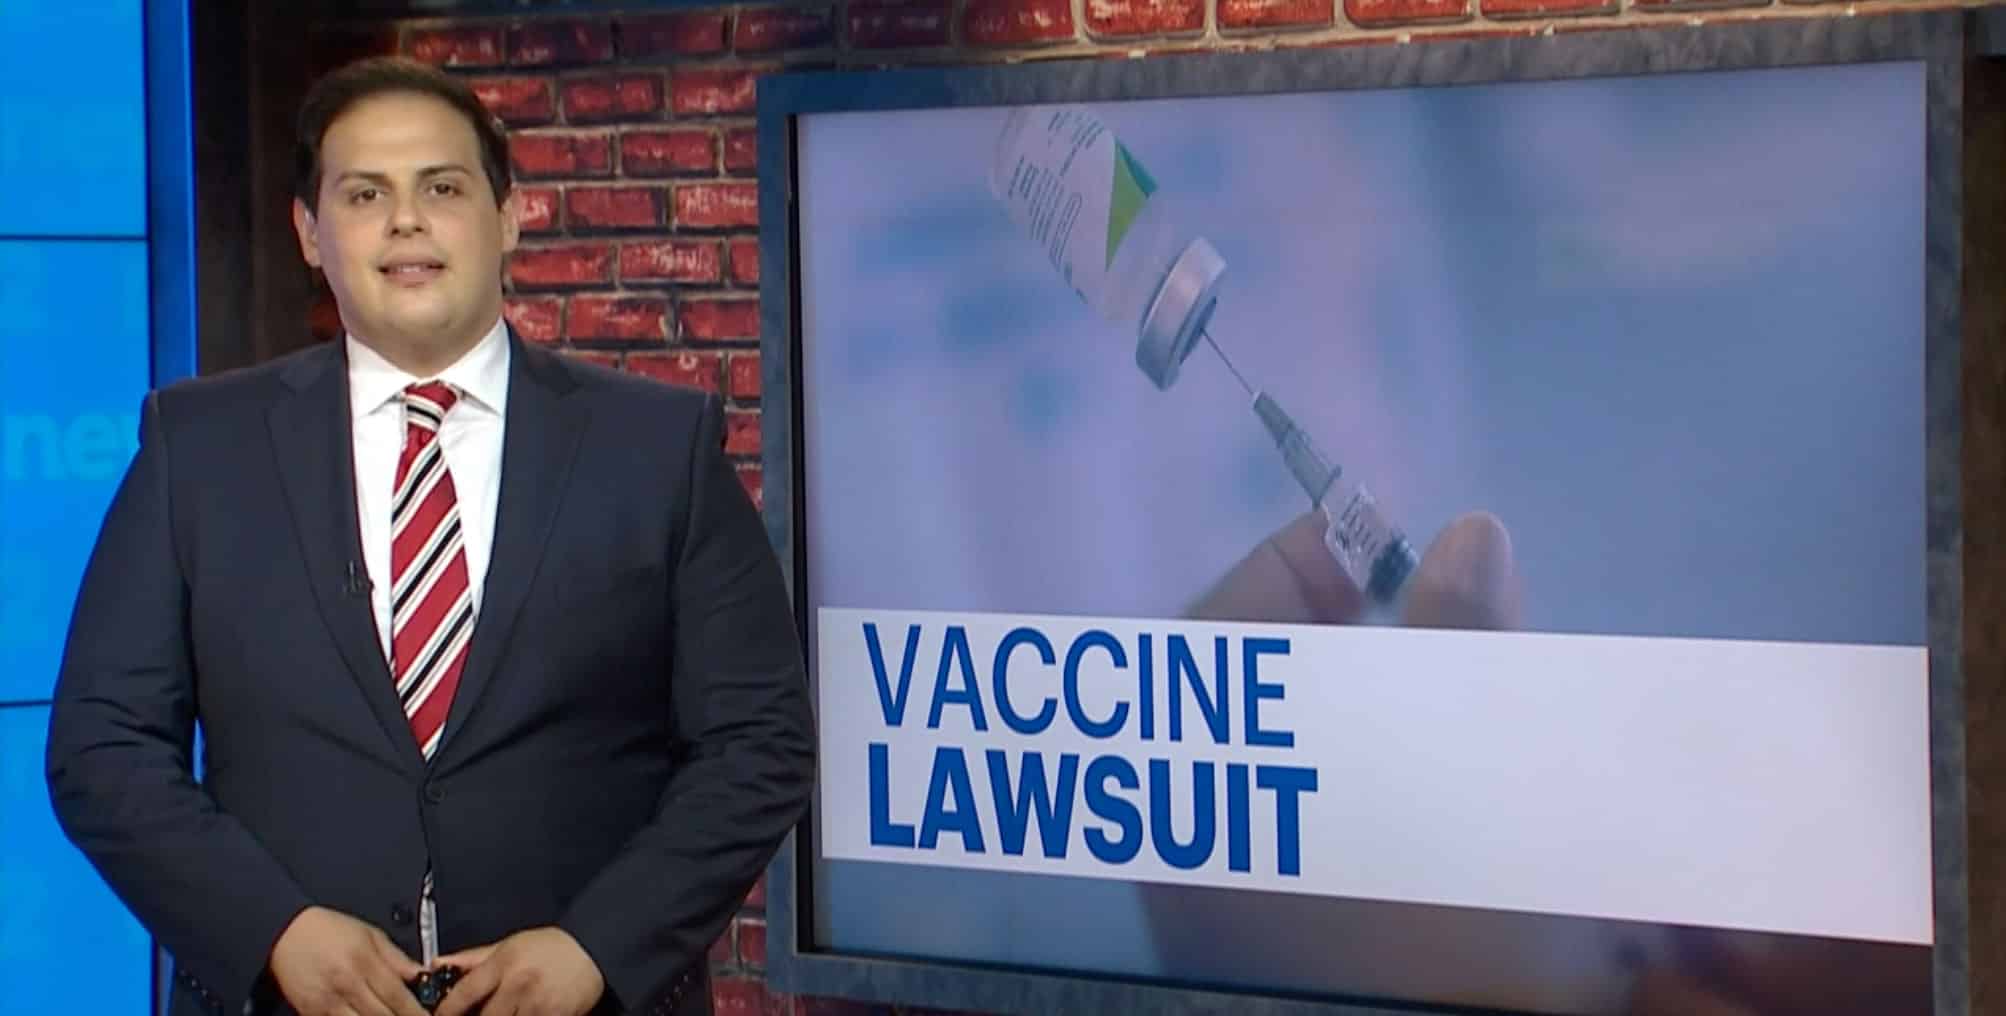 Couple sues Mott Haven company, claims they were fired for not getting vaccinated